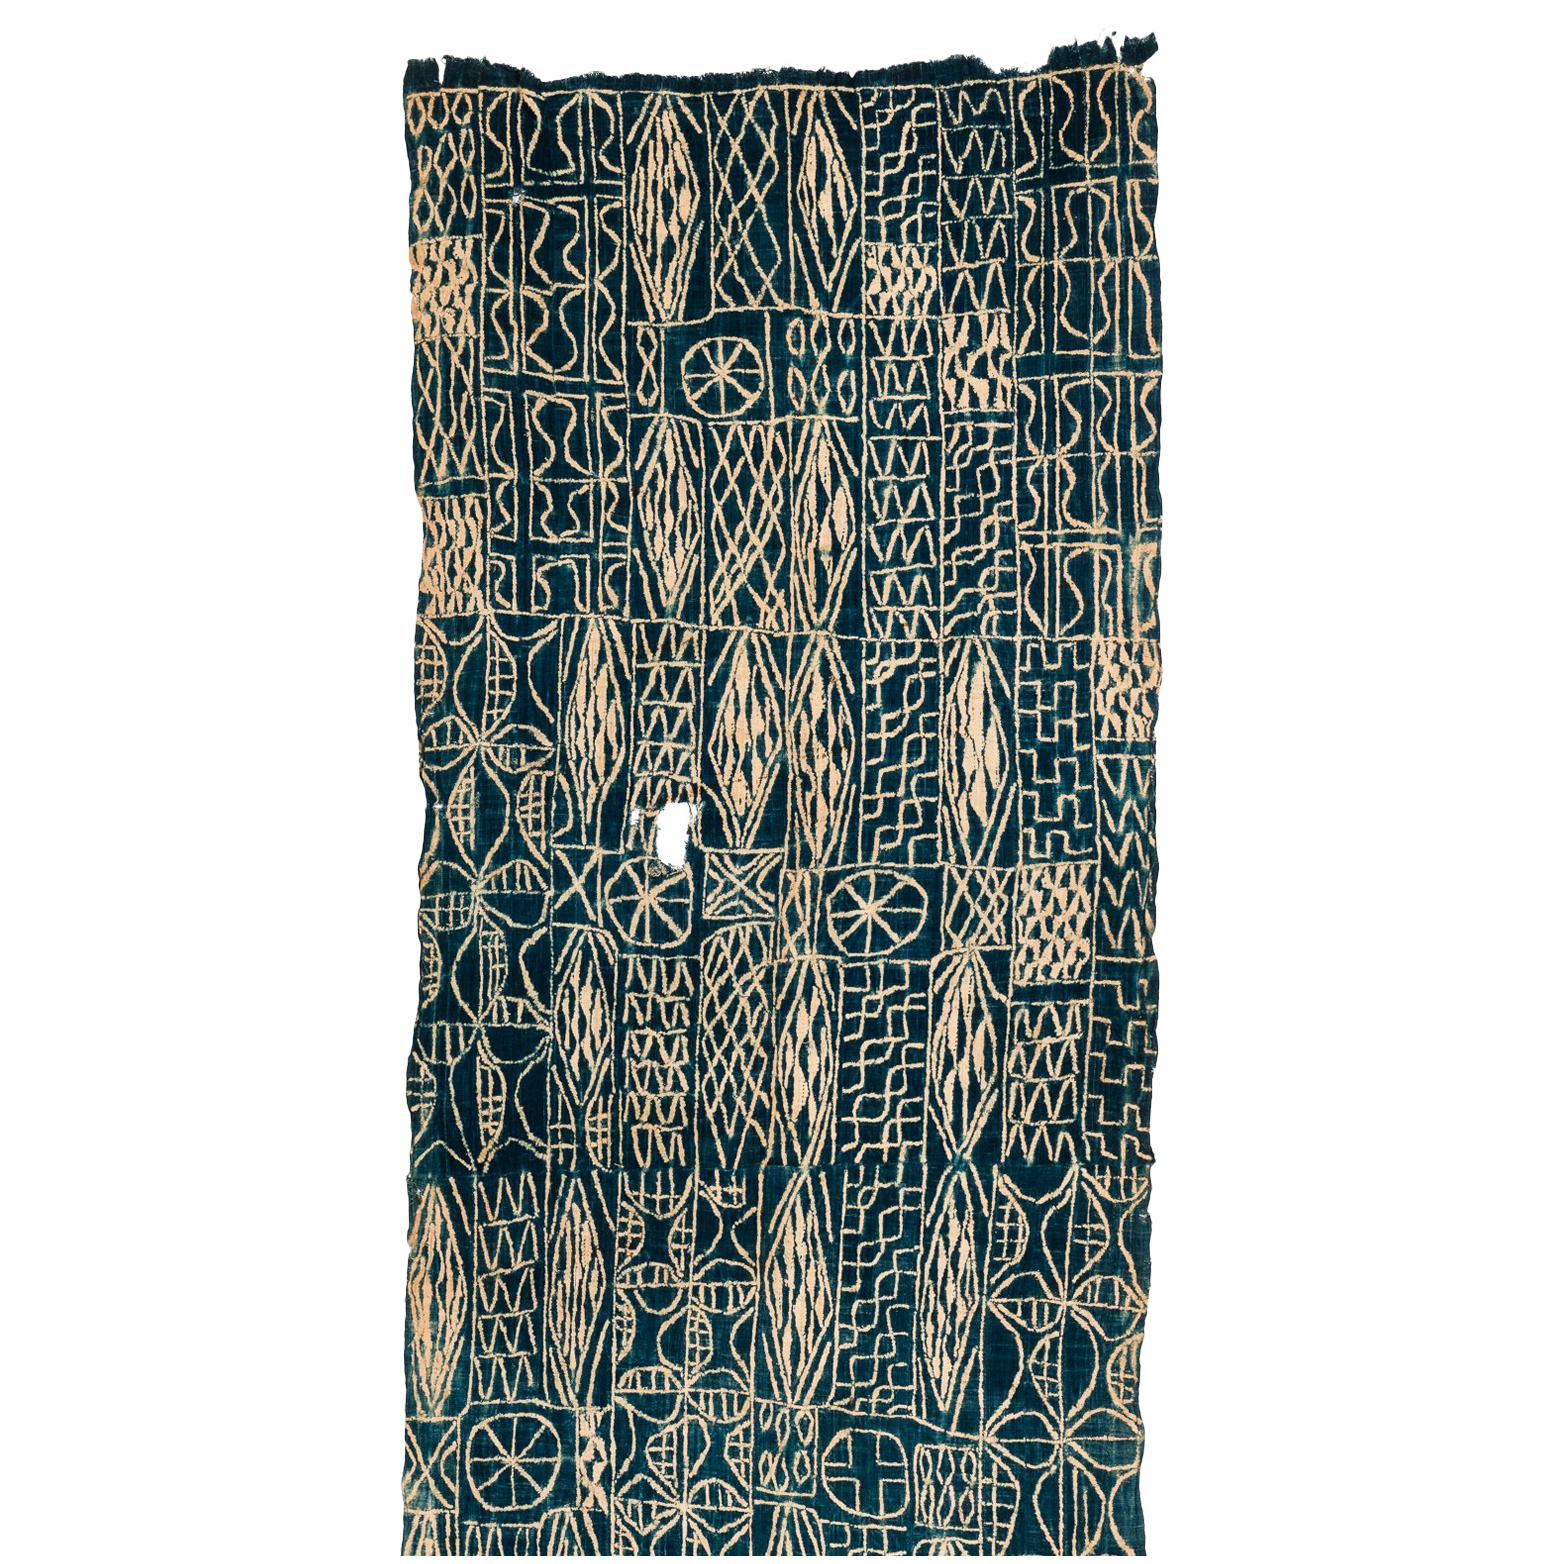 Antique Indigo Dyed Textile/Wall Hanging from Cameroon, Africa